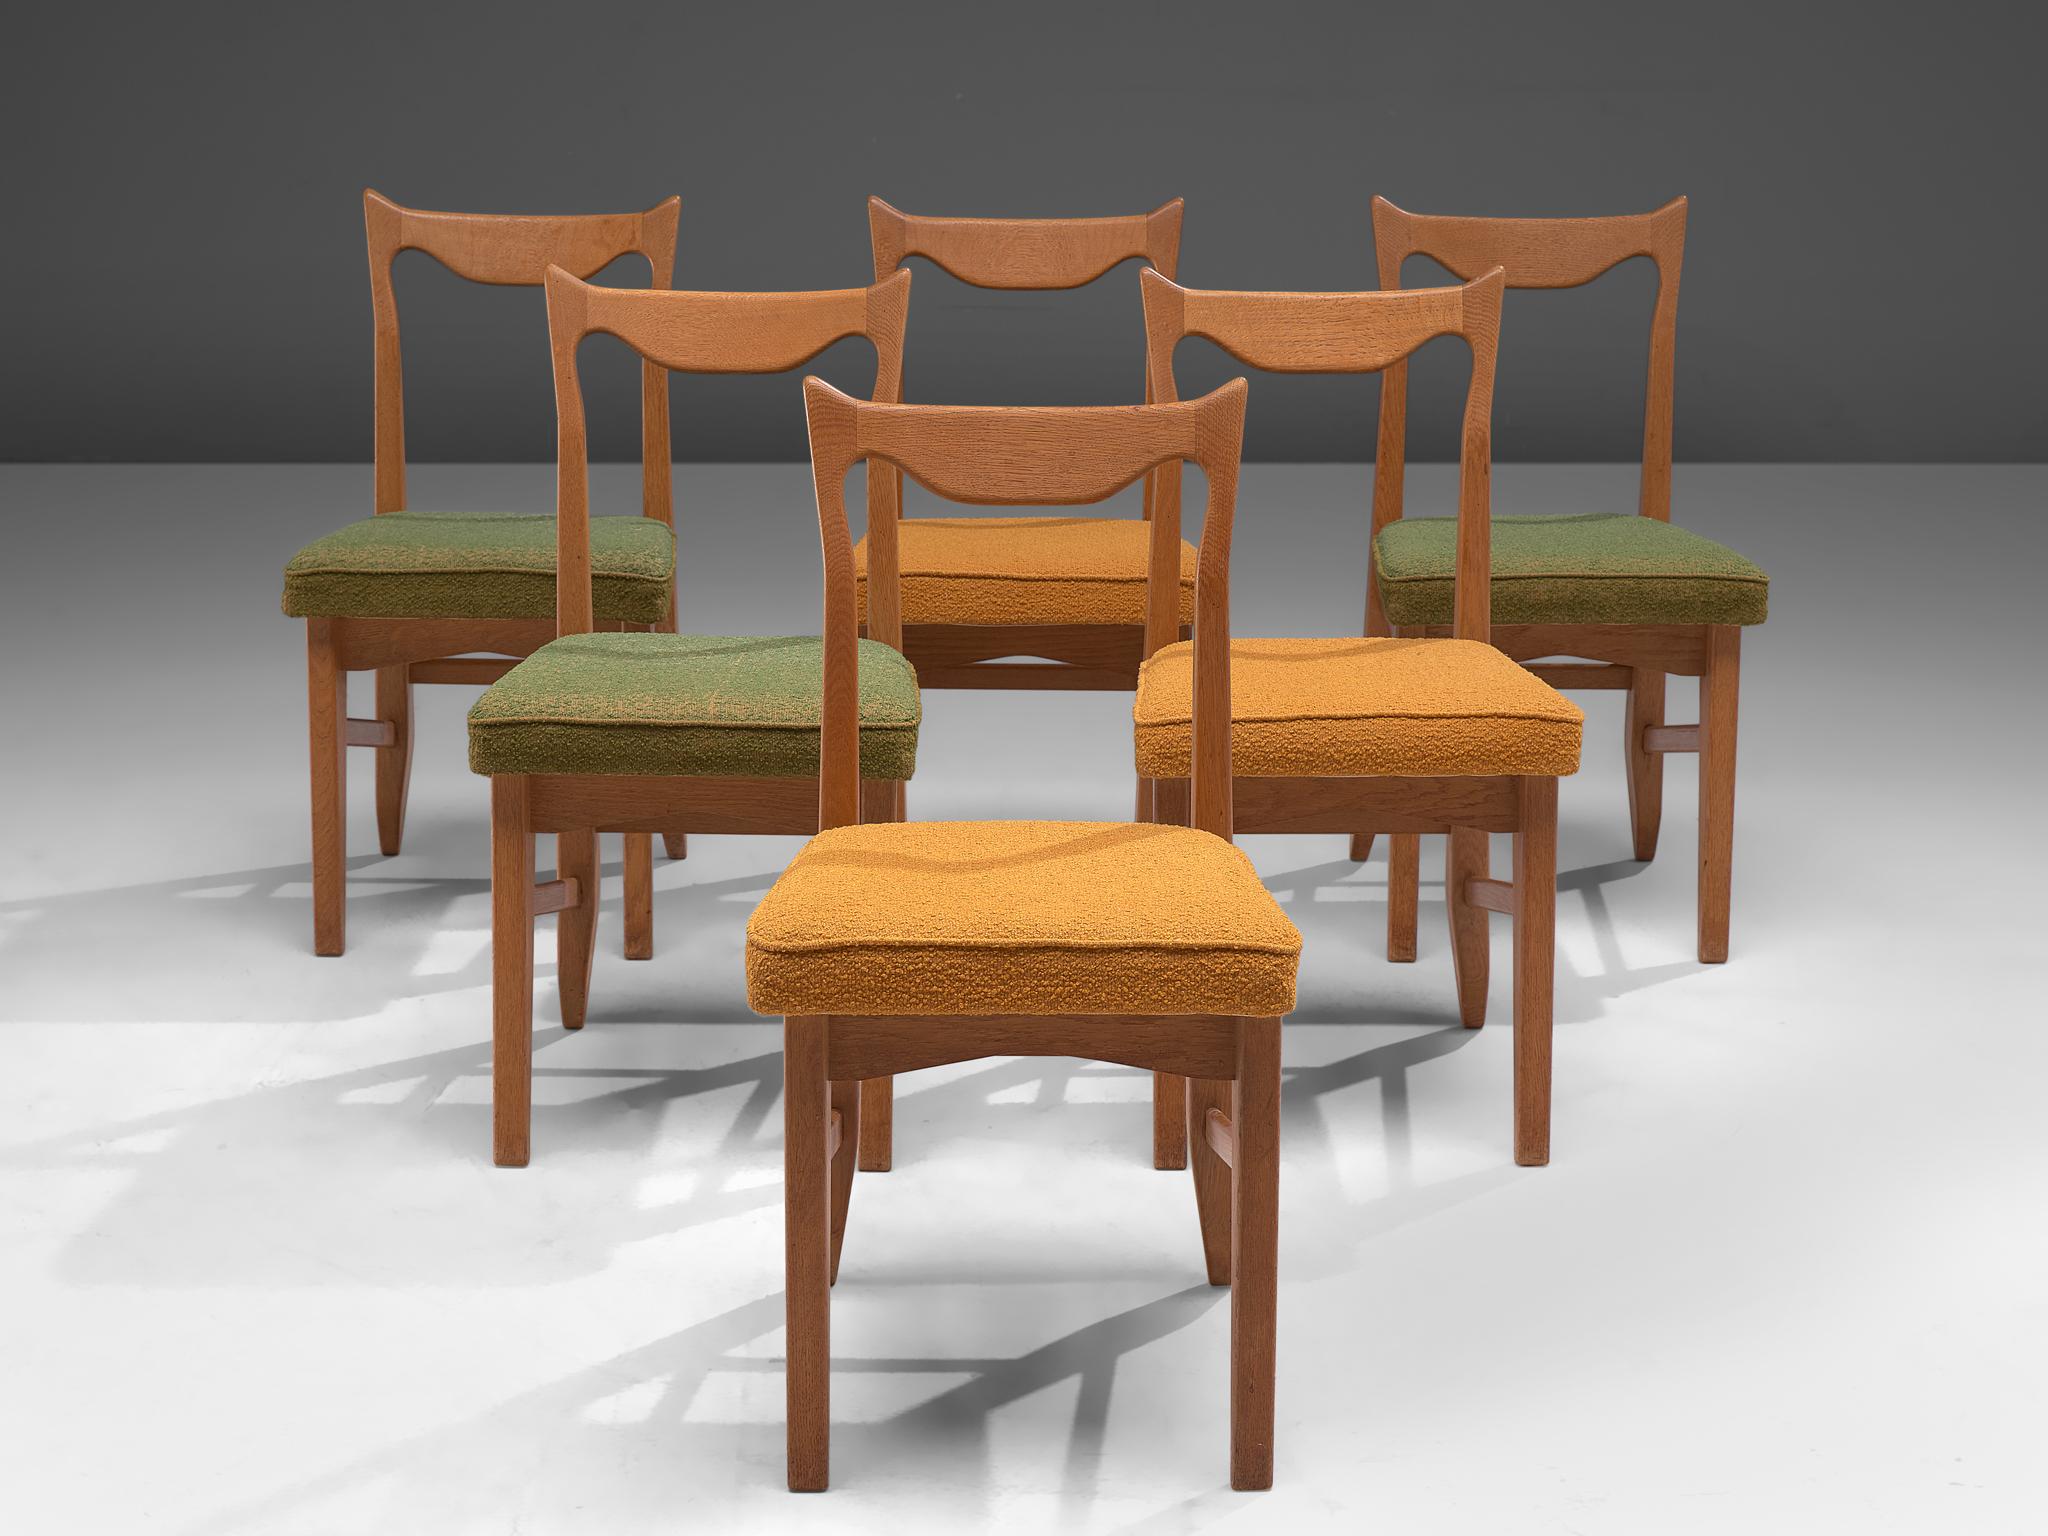 Guillerme et Chambron, set of 6 dining chairs 'Marie Claire', oak and fabric, France, 1960.

Set of six solid oak dining chairs by Guillerme and Chambron. These chairs show the characteristic frame of this French designer duo. Tapered legs with